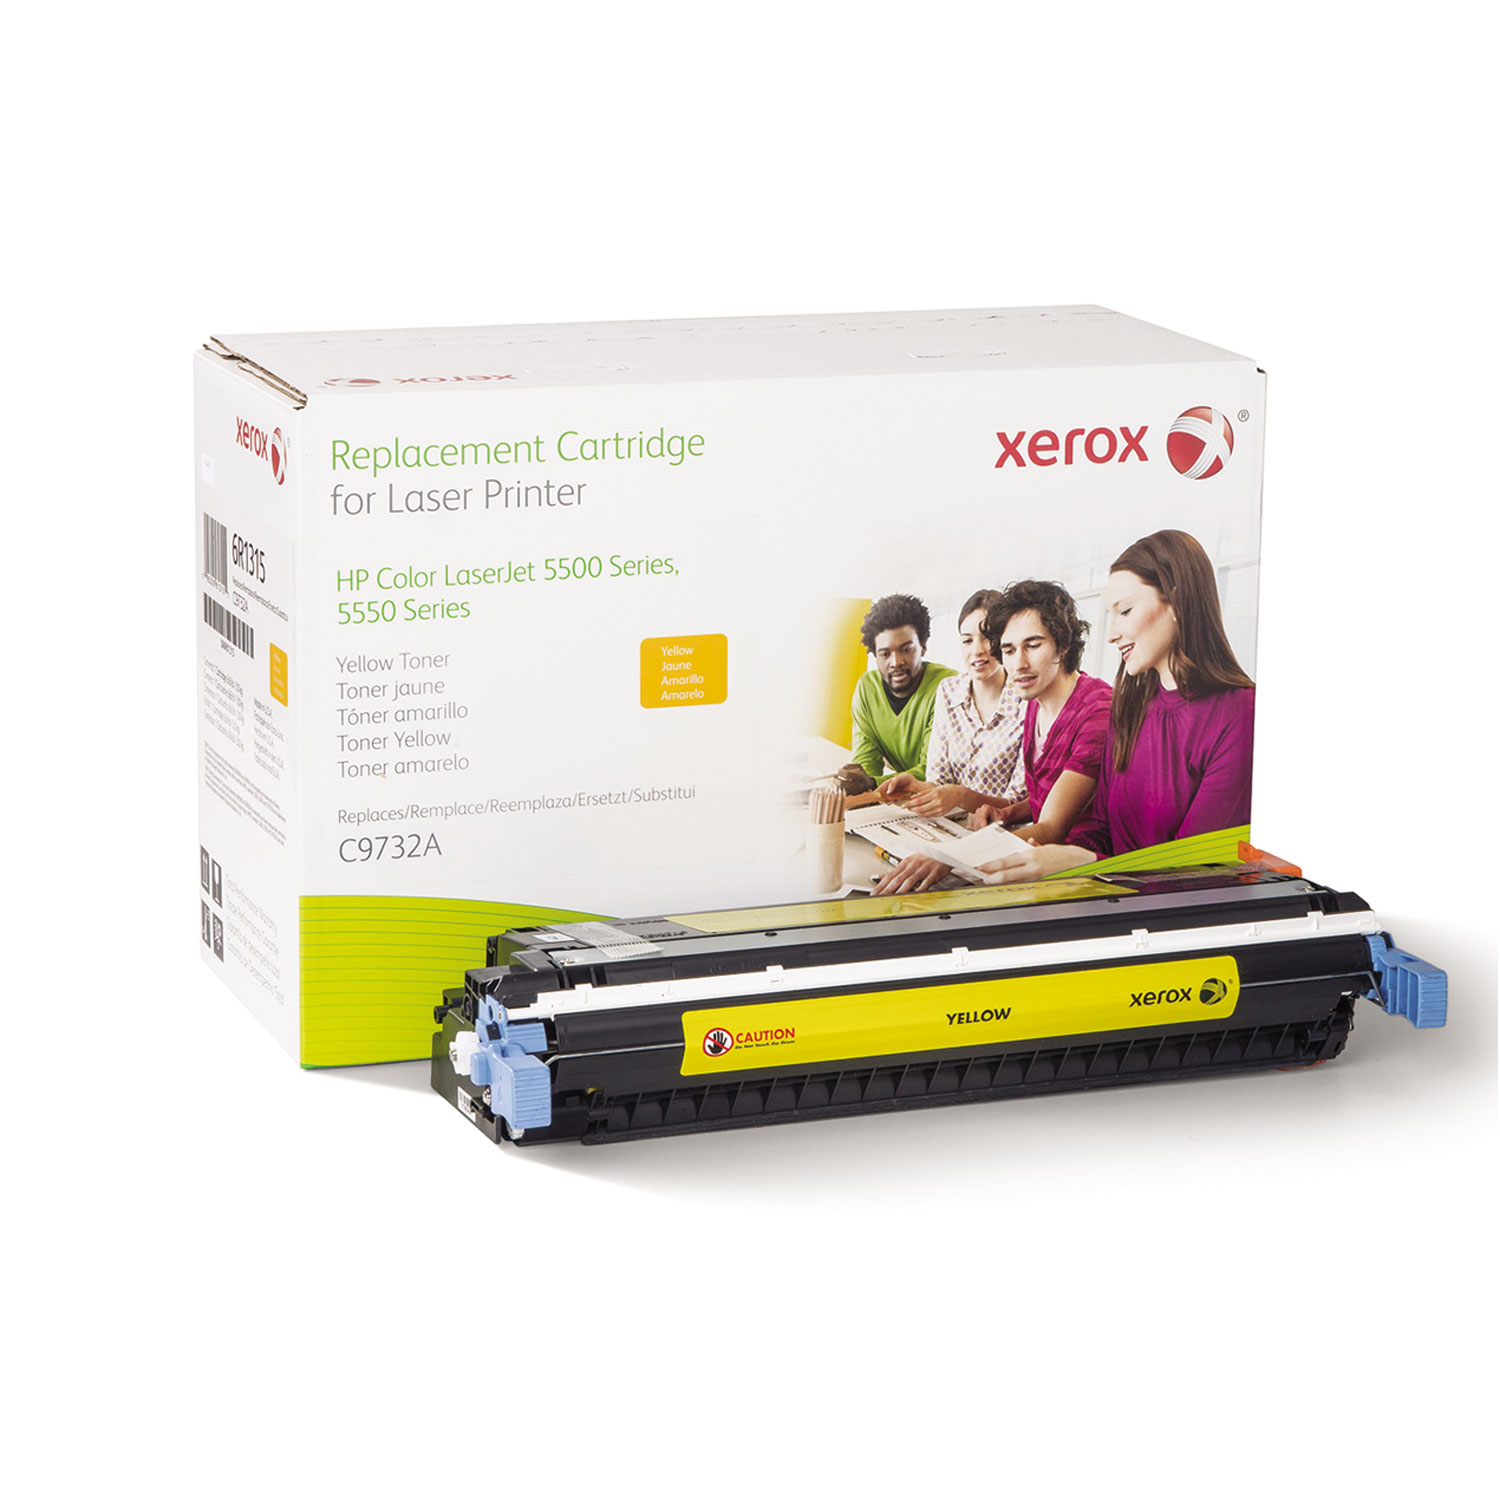  Xerox 006R01315 006R01315 Replacement Toner for C9732A (645A), Yellow (XER006R01315) 